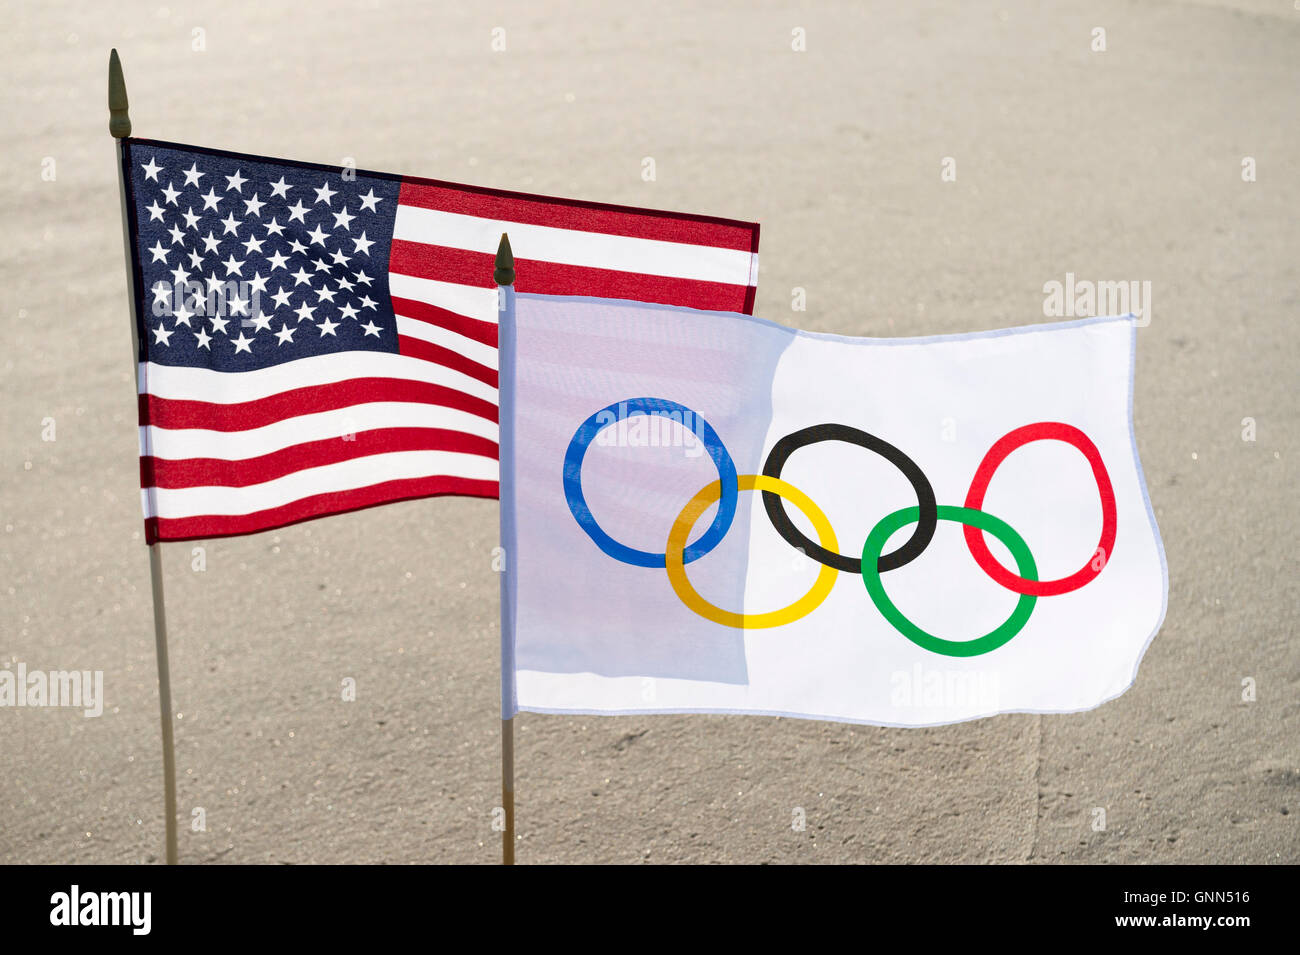 RIO DE JANEIRO - MARCH 24, 2016: Olympic and American flags stand fluttering in smooth sand on the beach. Stock Photo